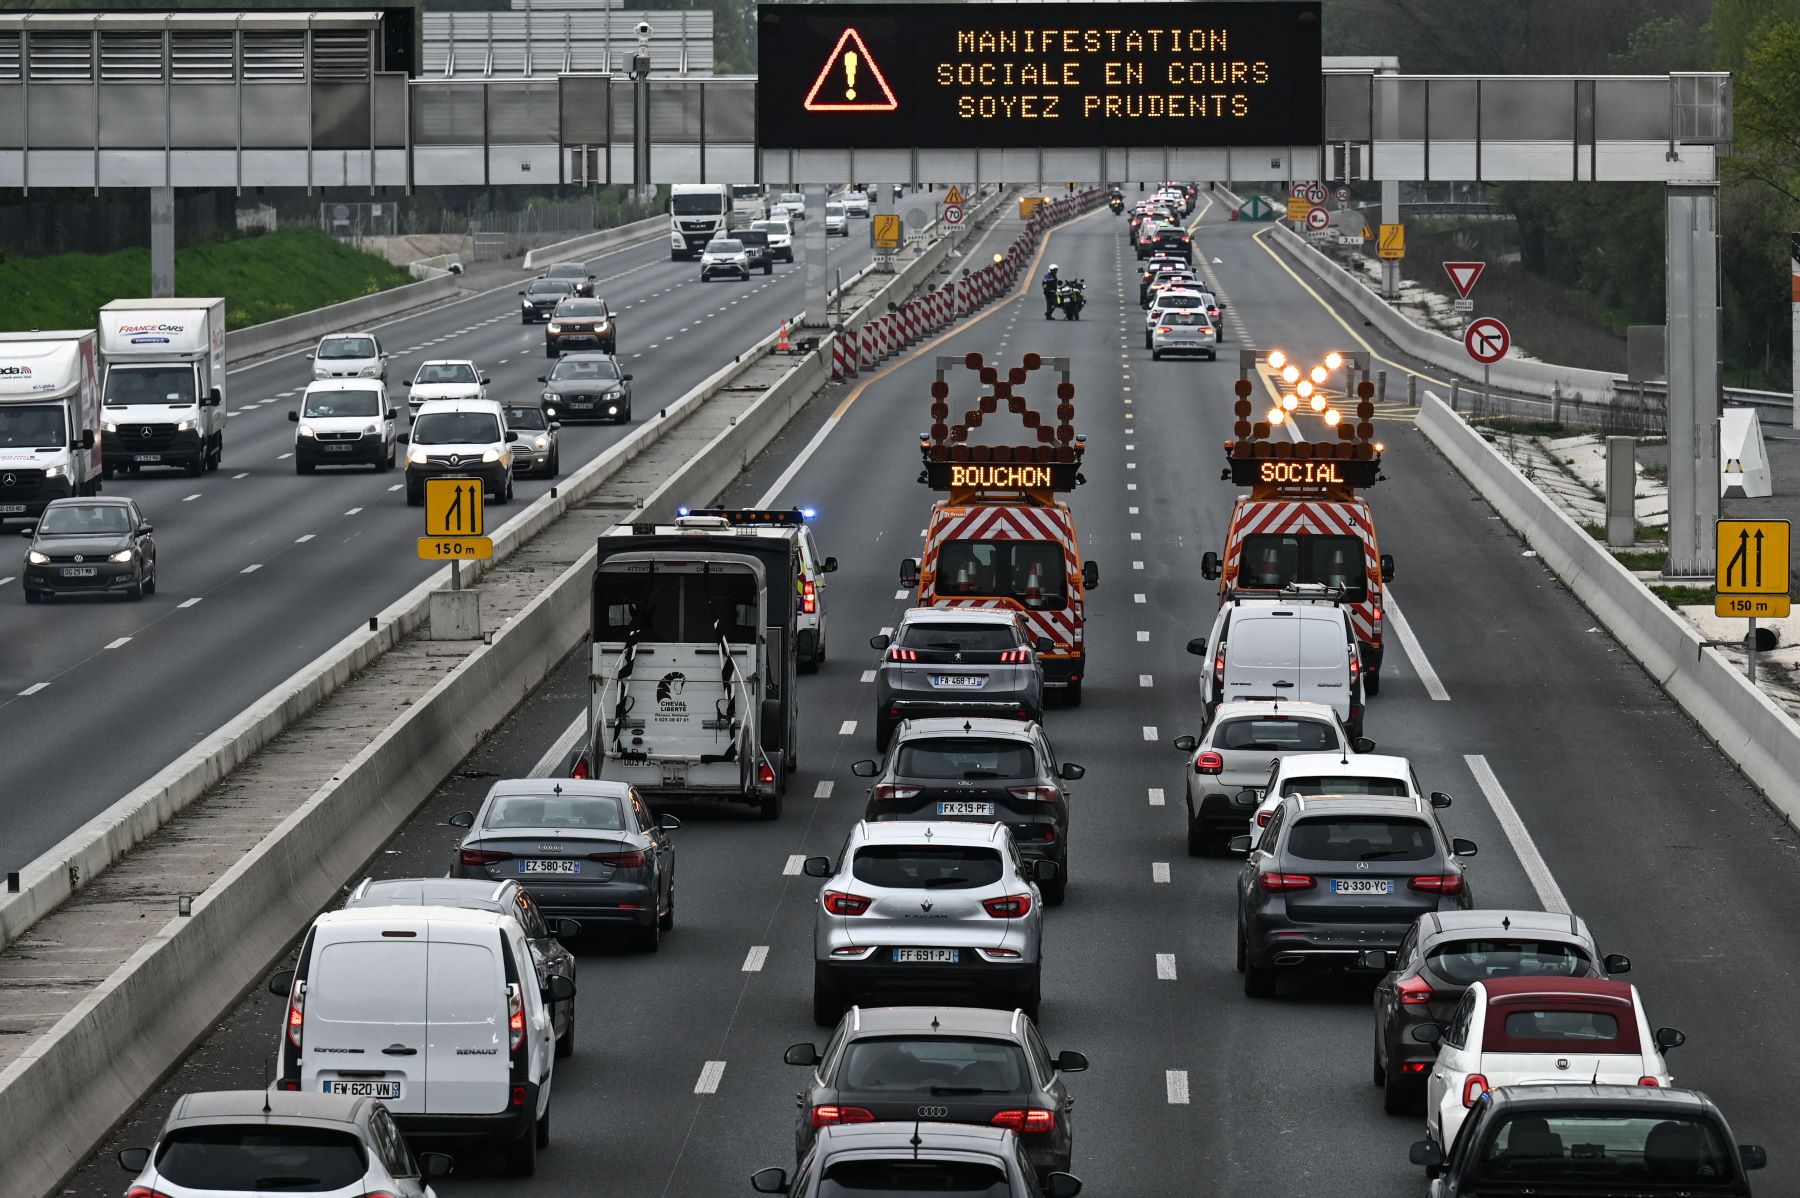 Highway safety trucks slowing down traffic in Bordeaux, France